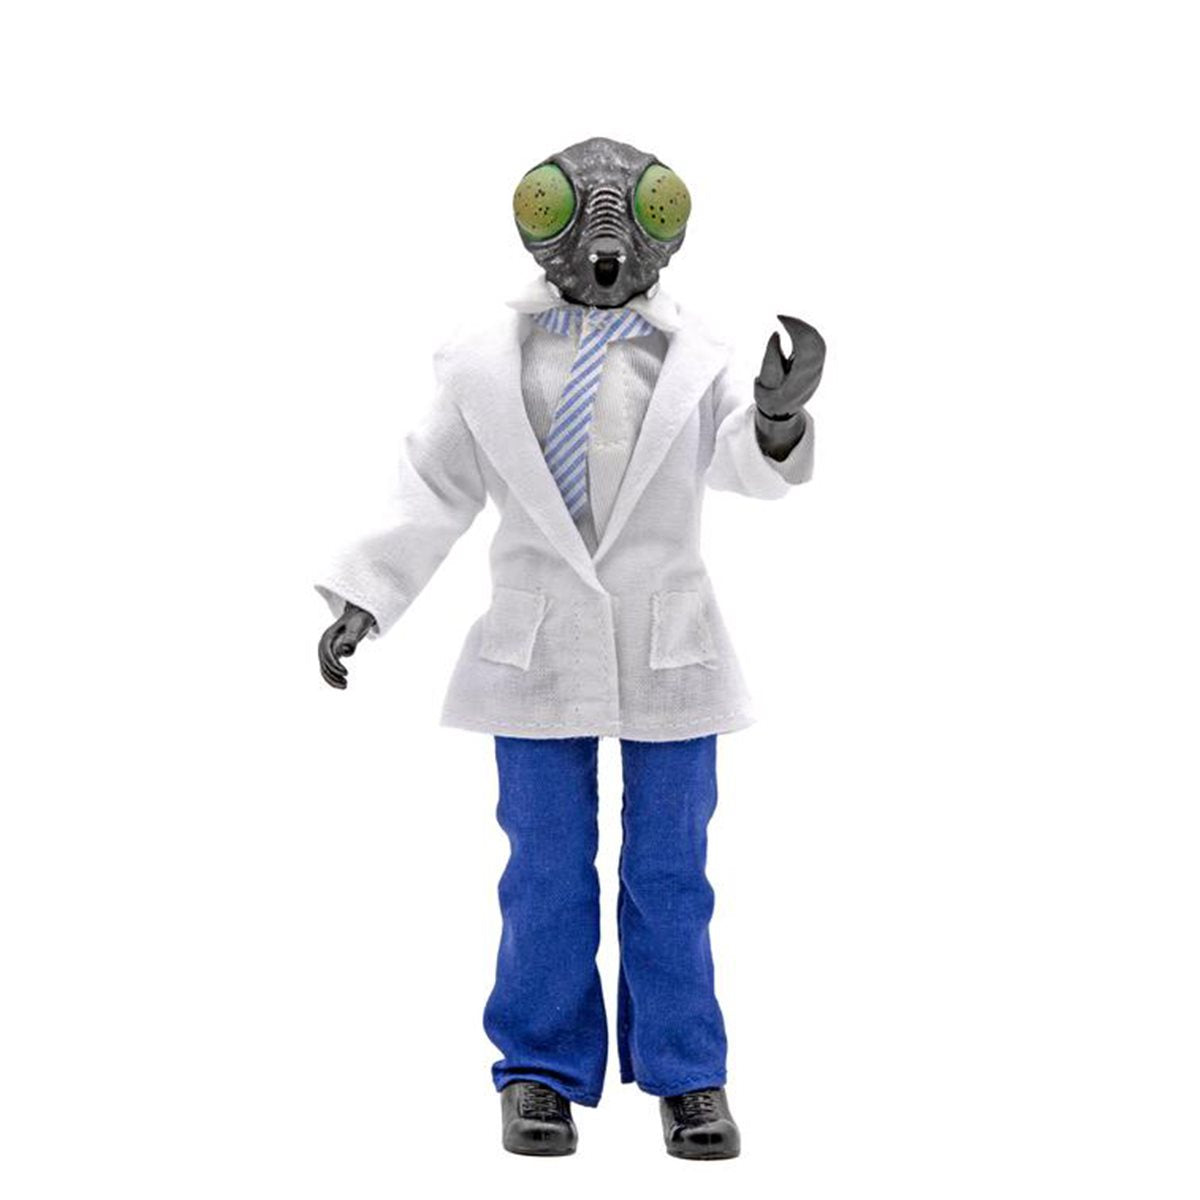 Mego Sci-Fi Wave 8 The Fly (Blue Tie) 8" Action Figure - Zlc Collectibles